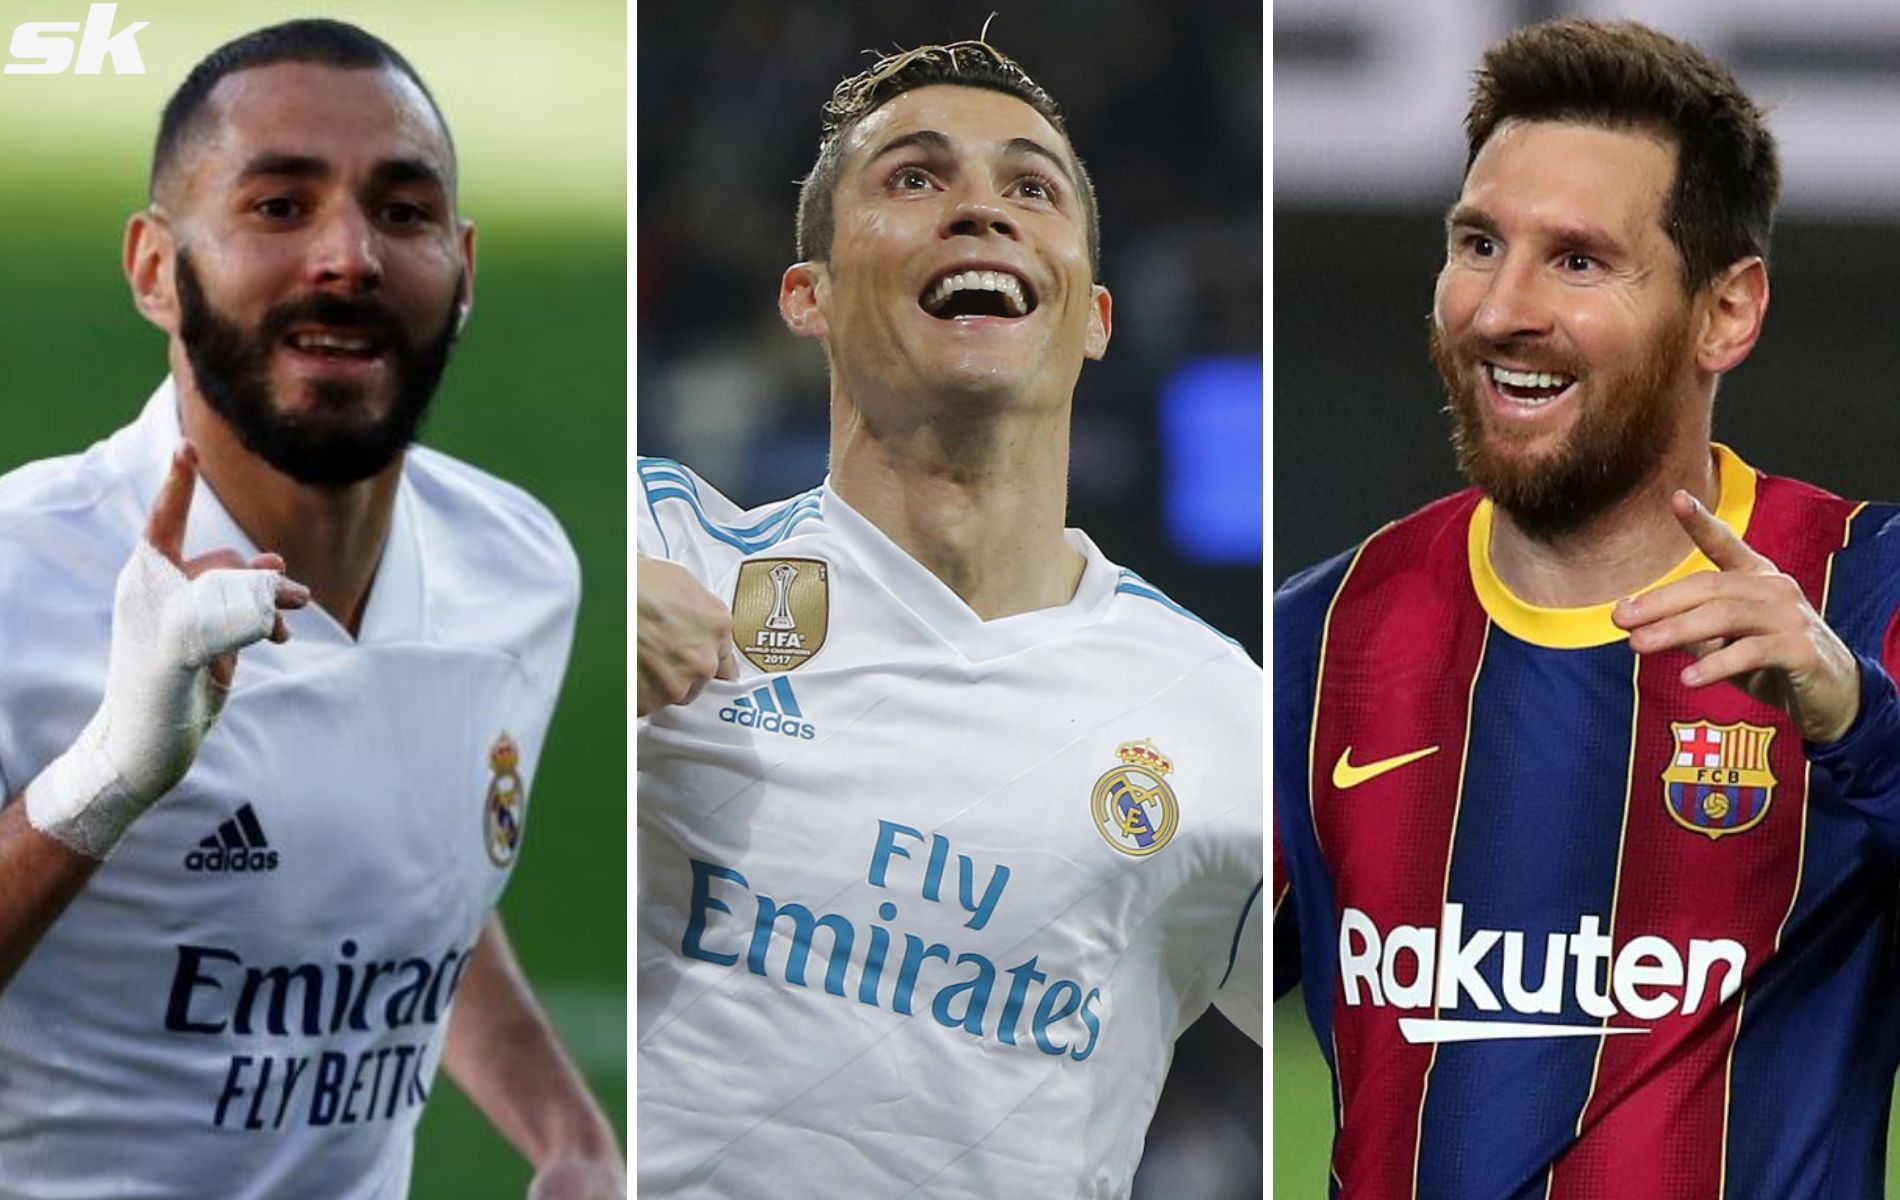 Who were the greatest foreigners to play in La Liga?